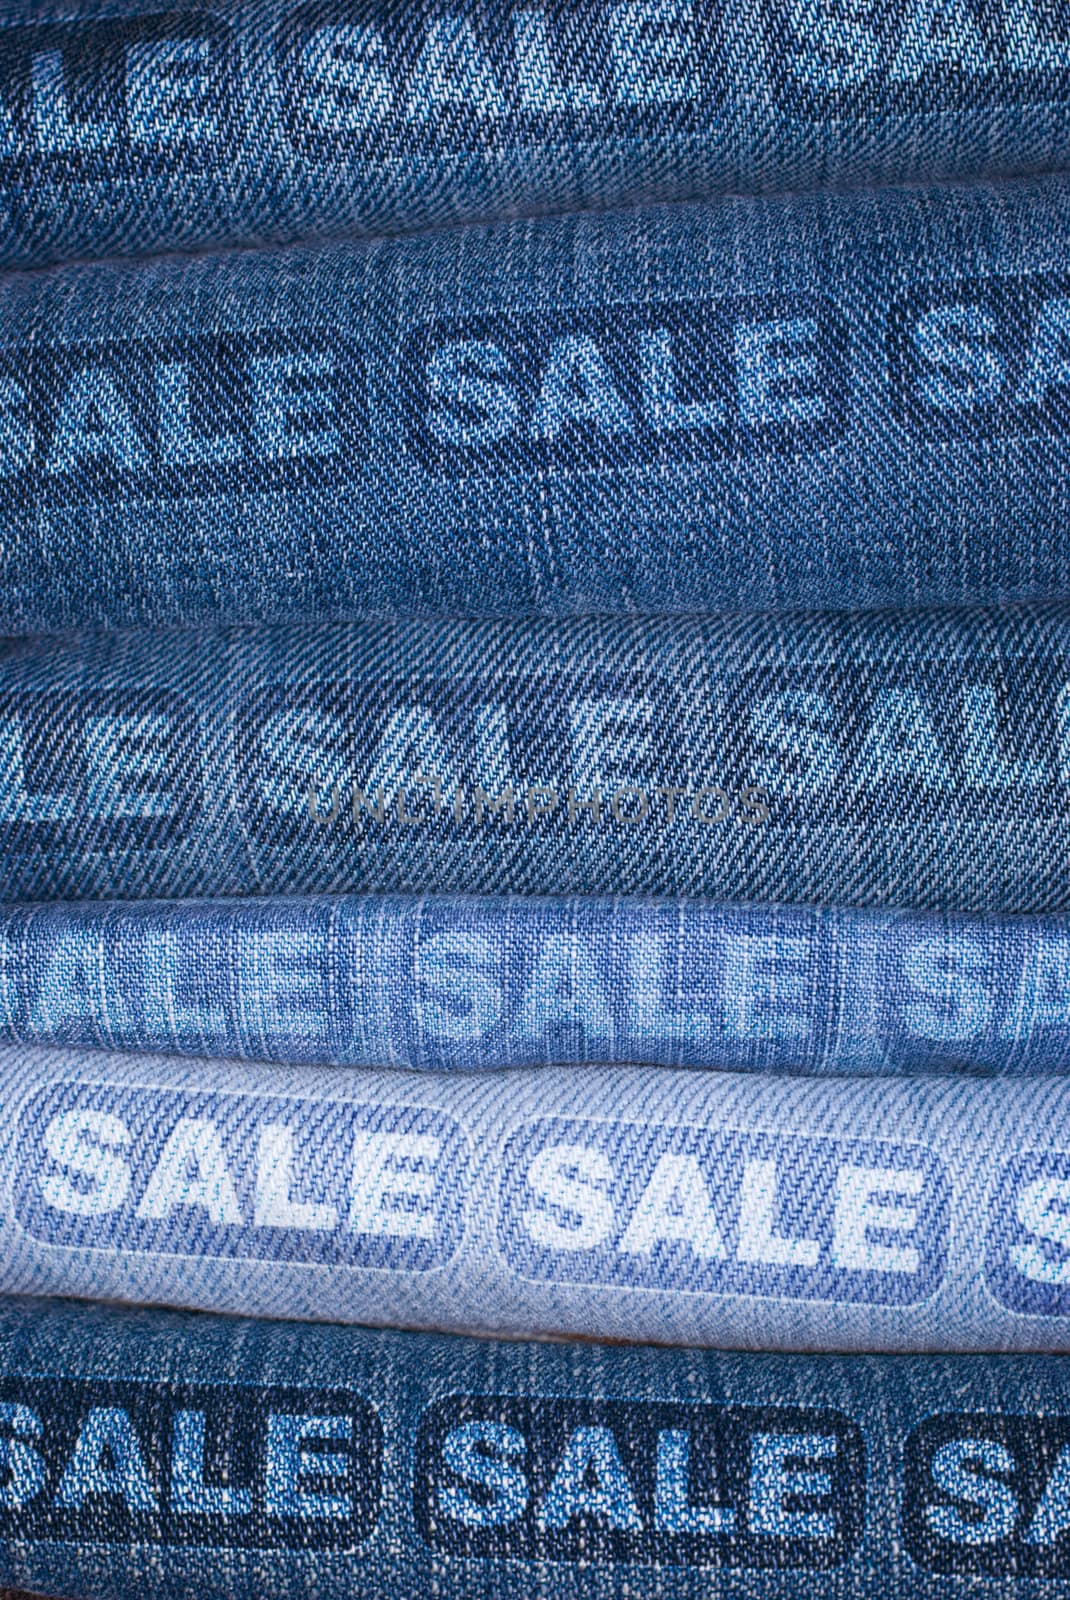 Sale Signs on Stack of Blue Jeans